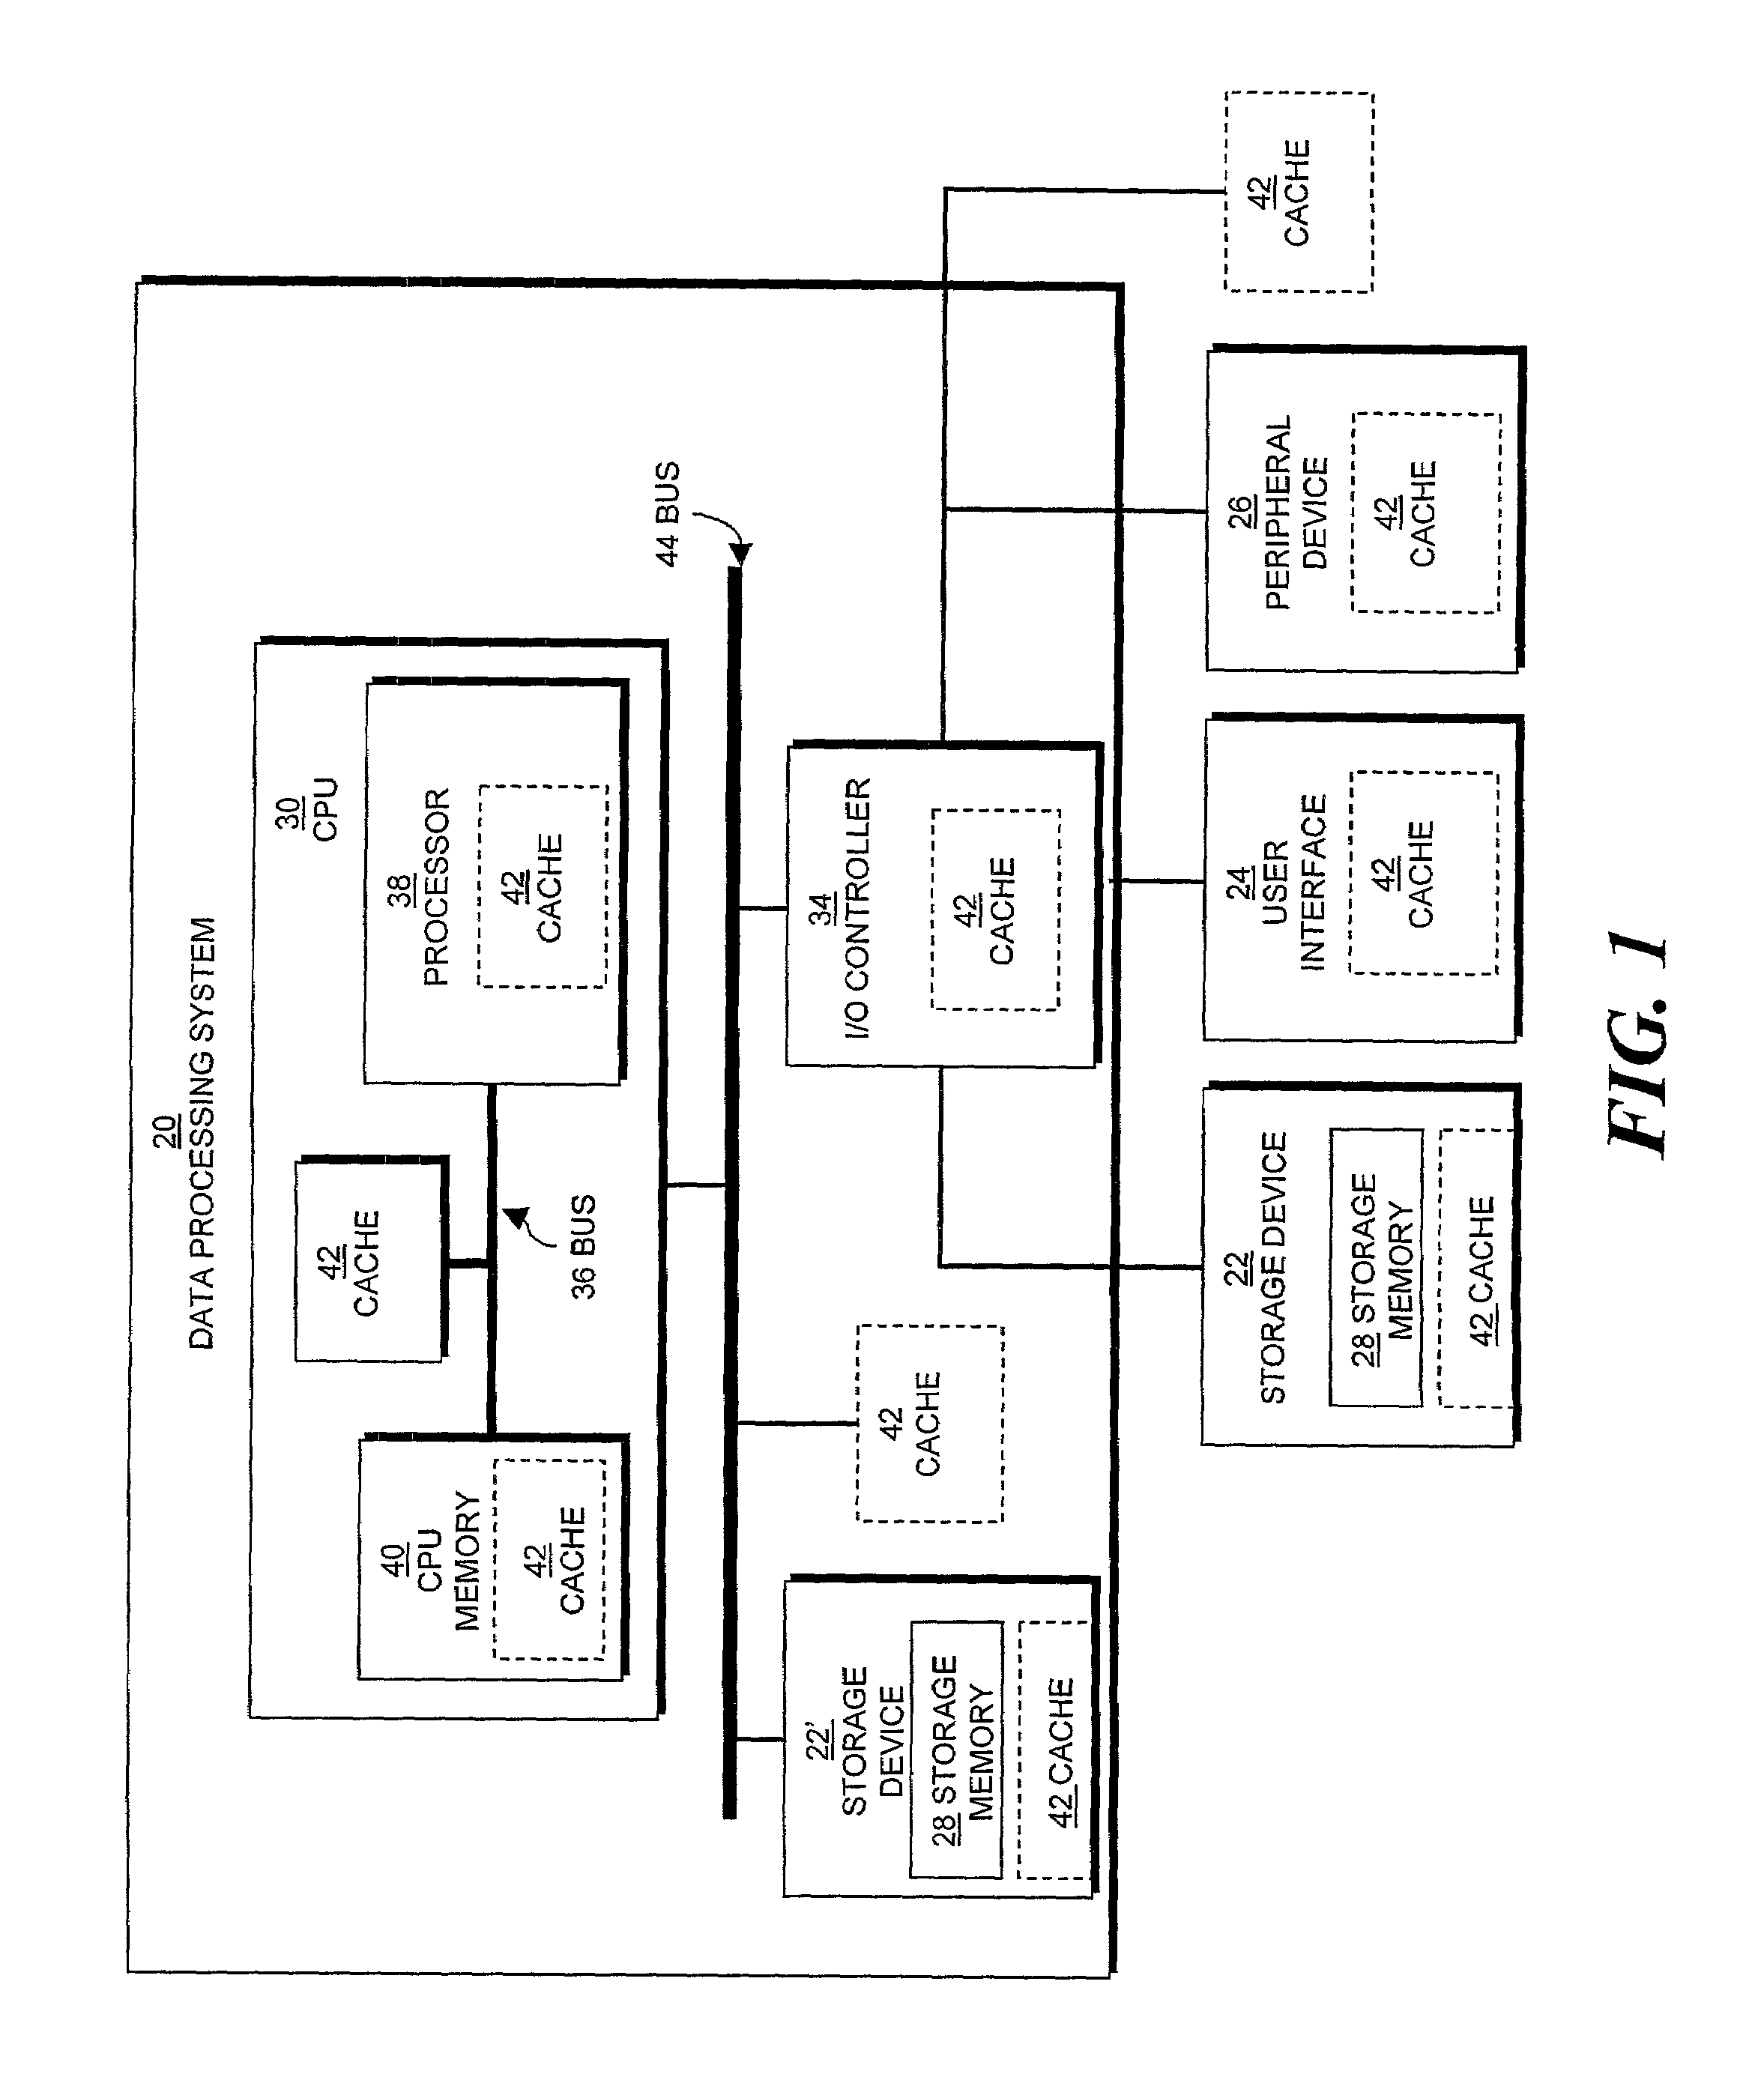 Cache system and method for generating uncached objects from cached and stored object components